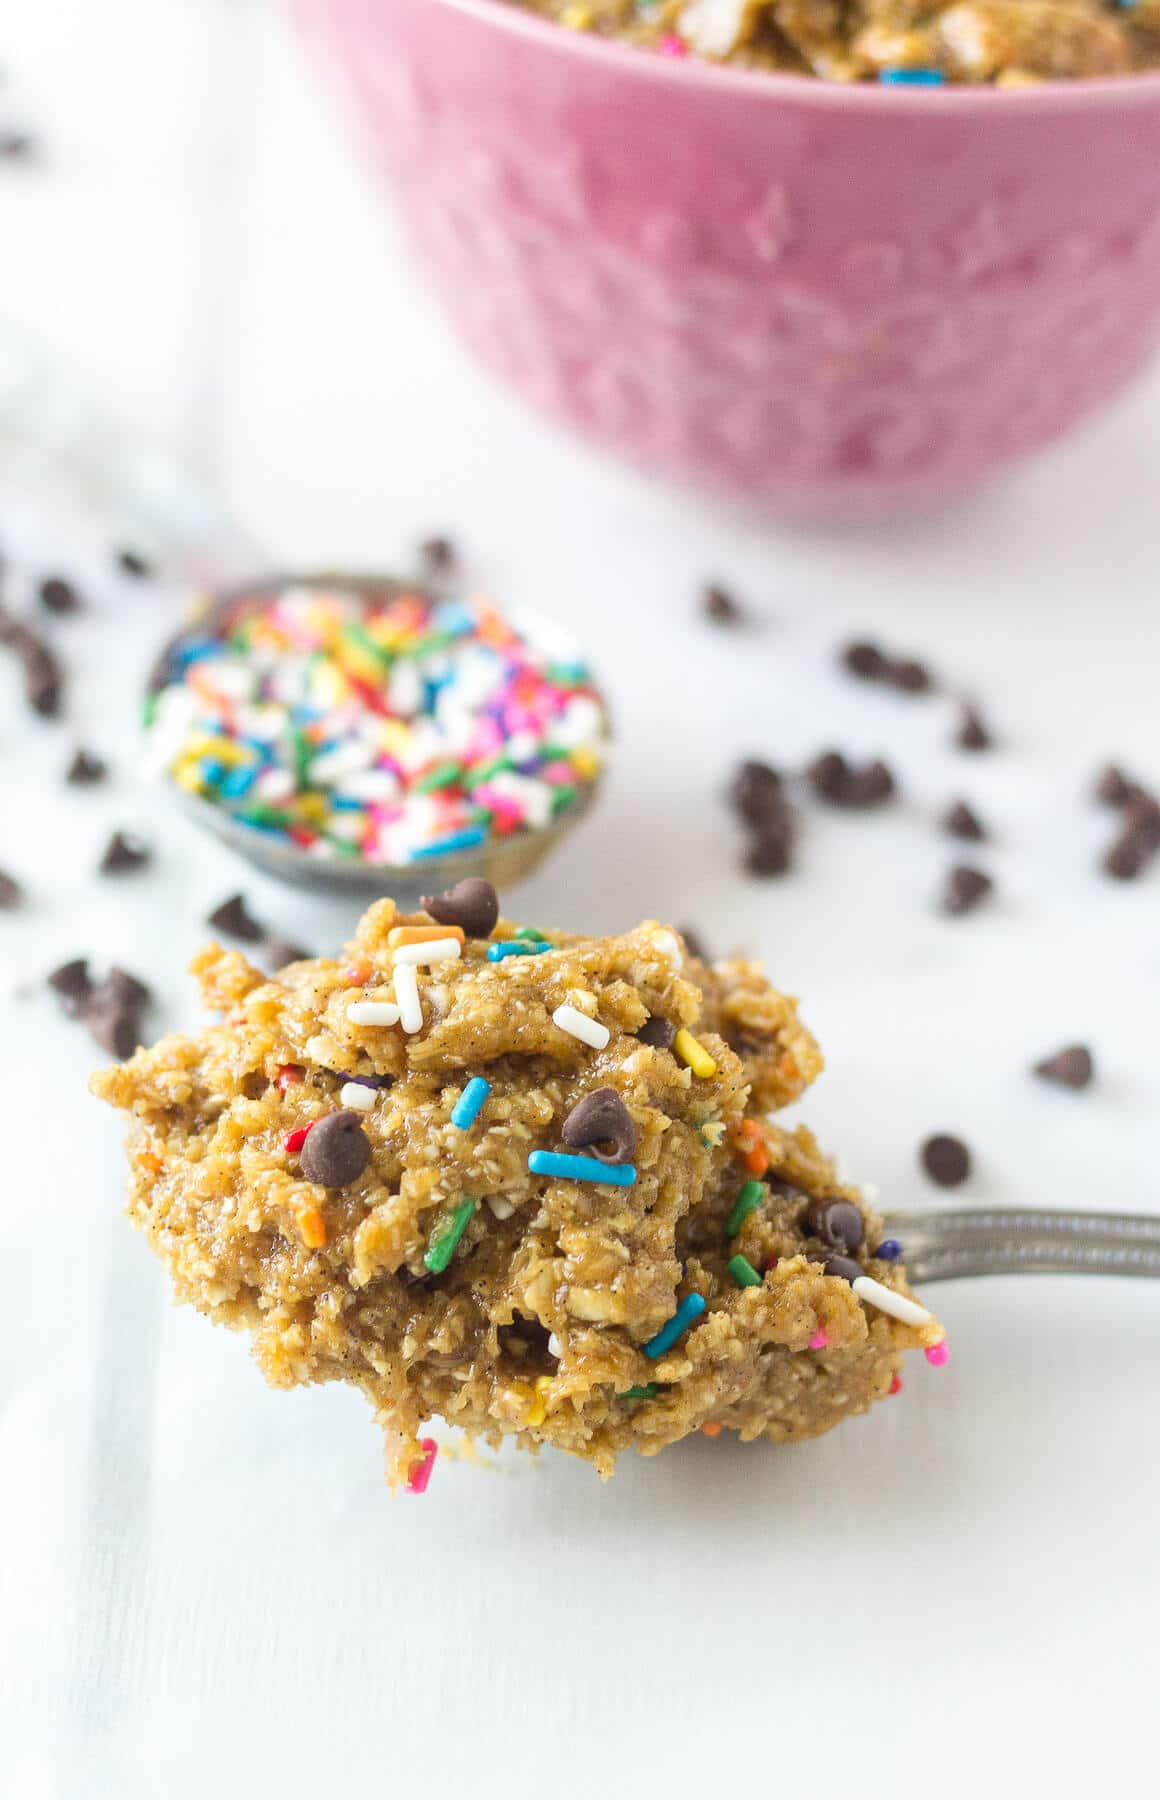 This healthy funfetti protein cookie dough is an easy snack recipe to fuel you up and keep you full. This healthy recipe is made with raw, natural ingredients and filled with flavor and protein.